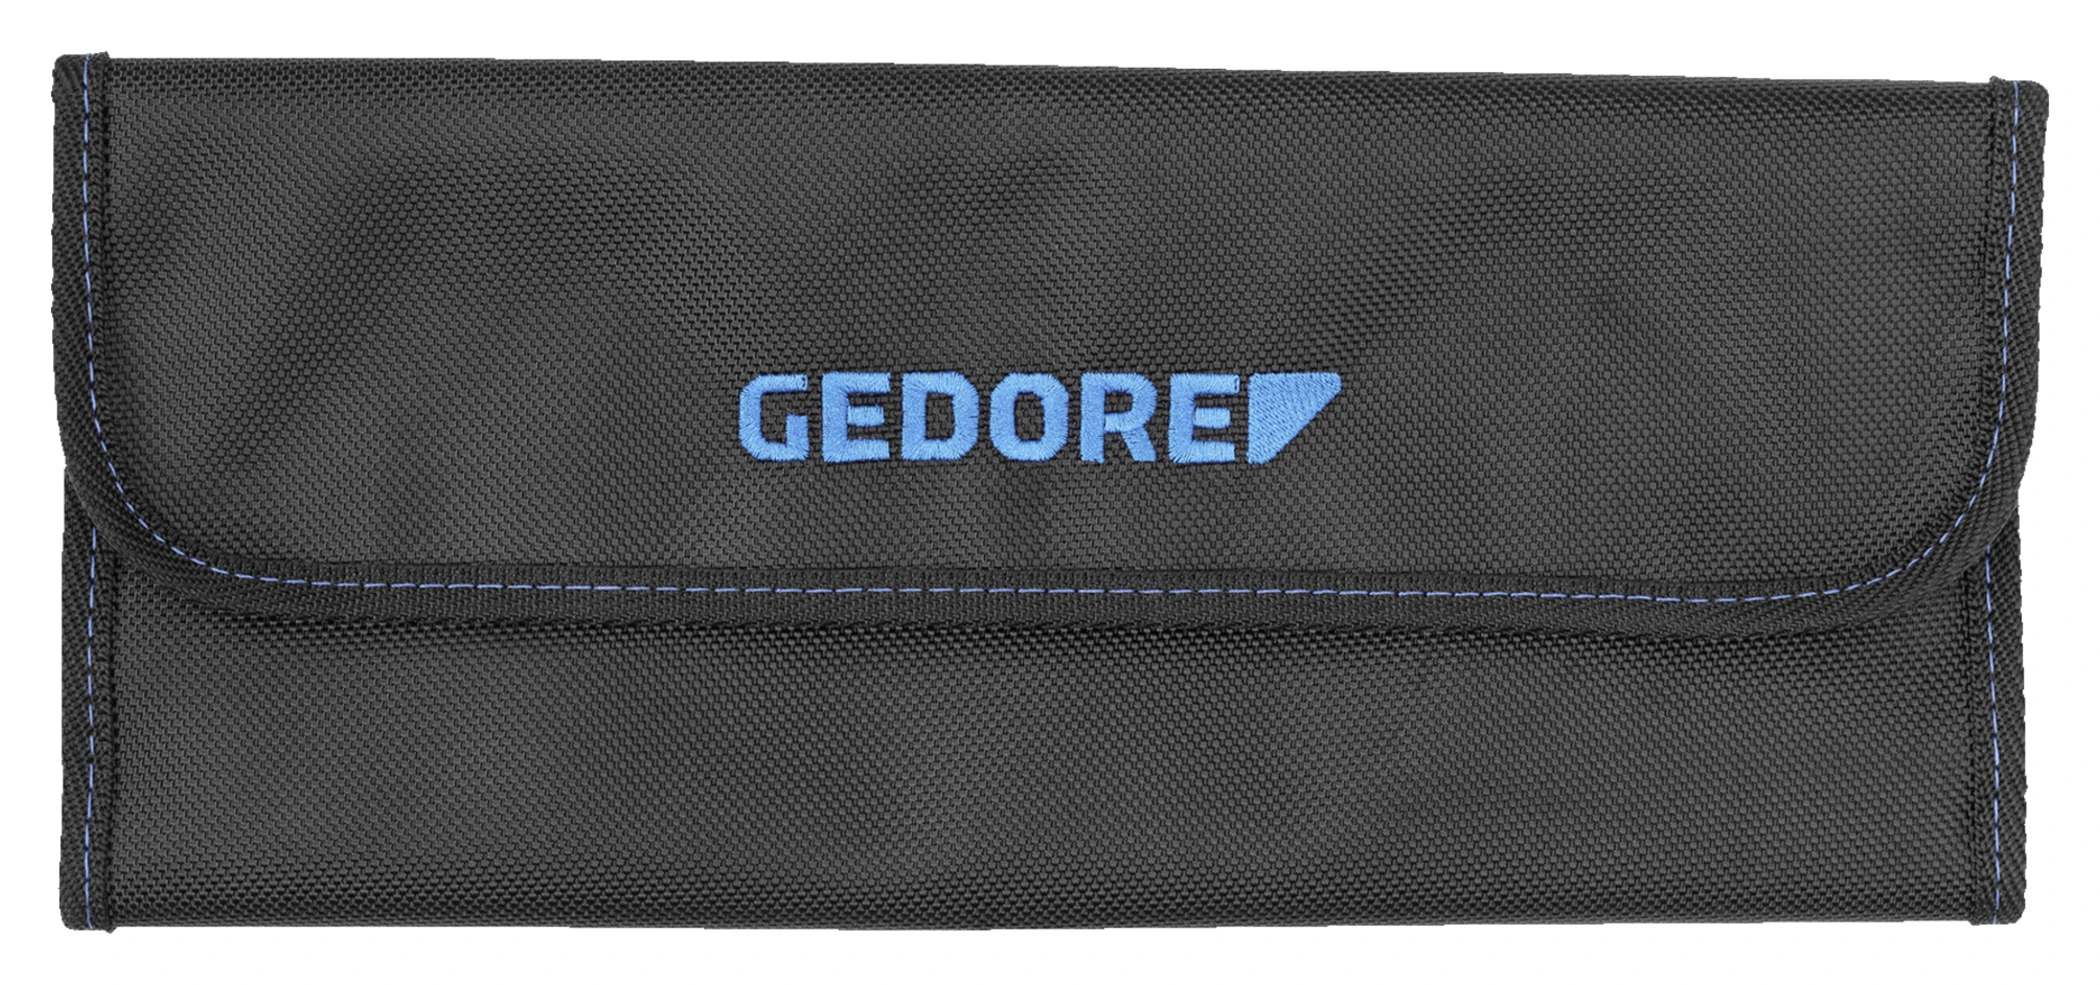 GEDORE ROLL-UP TOOL BAG